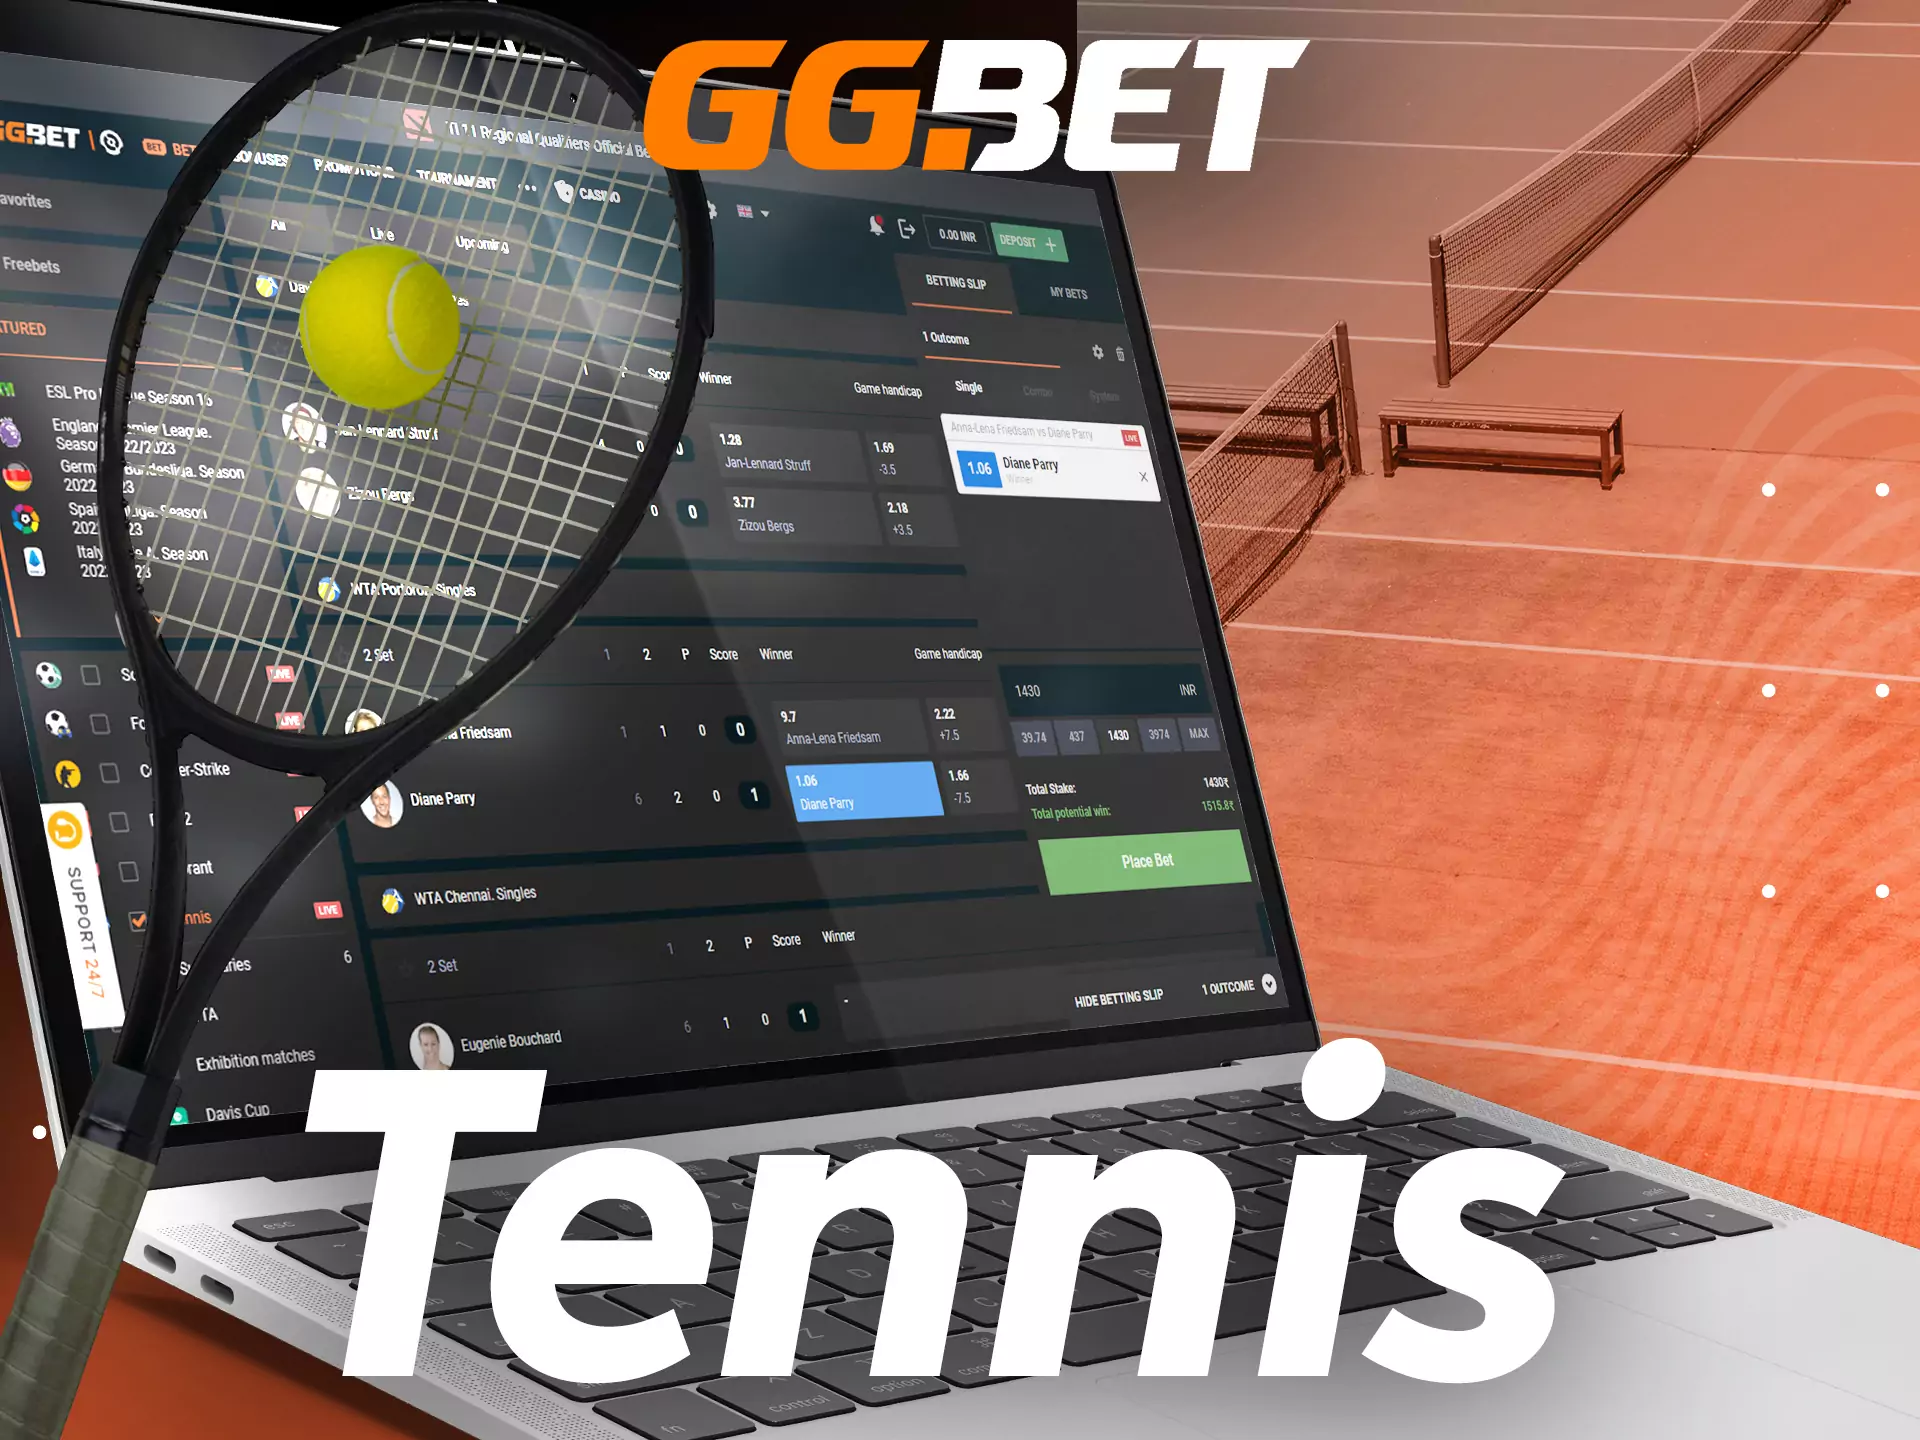 Betting on tennis matches is also popular at GGBet.